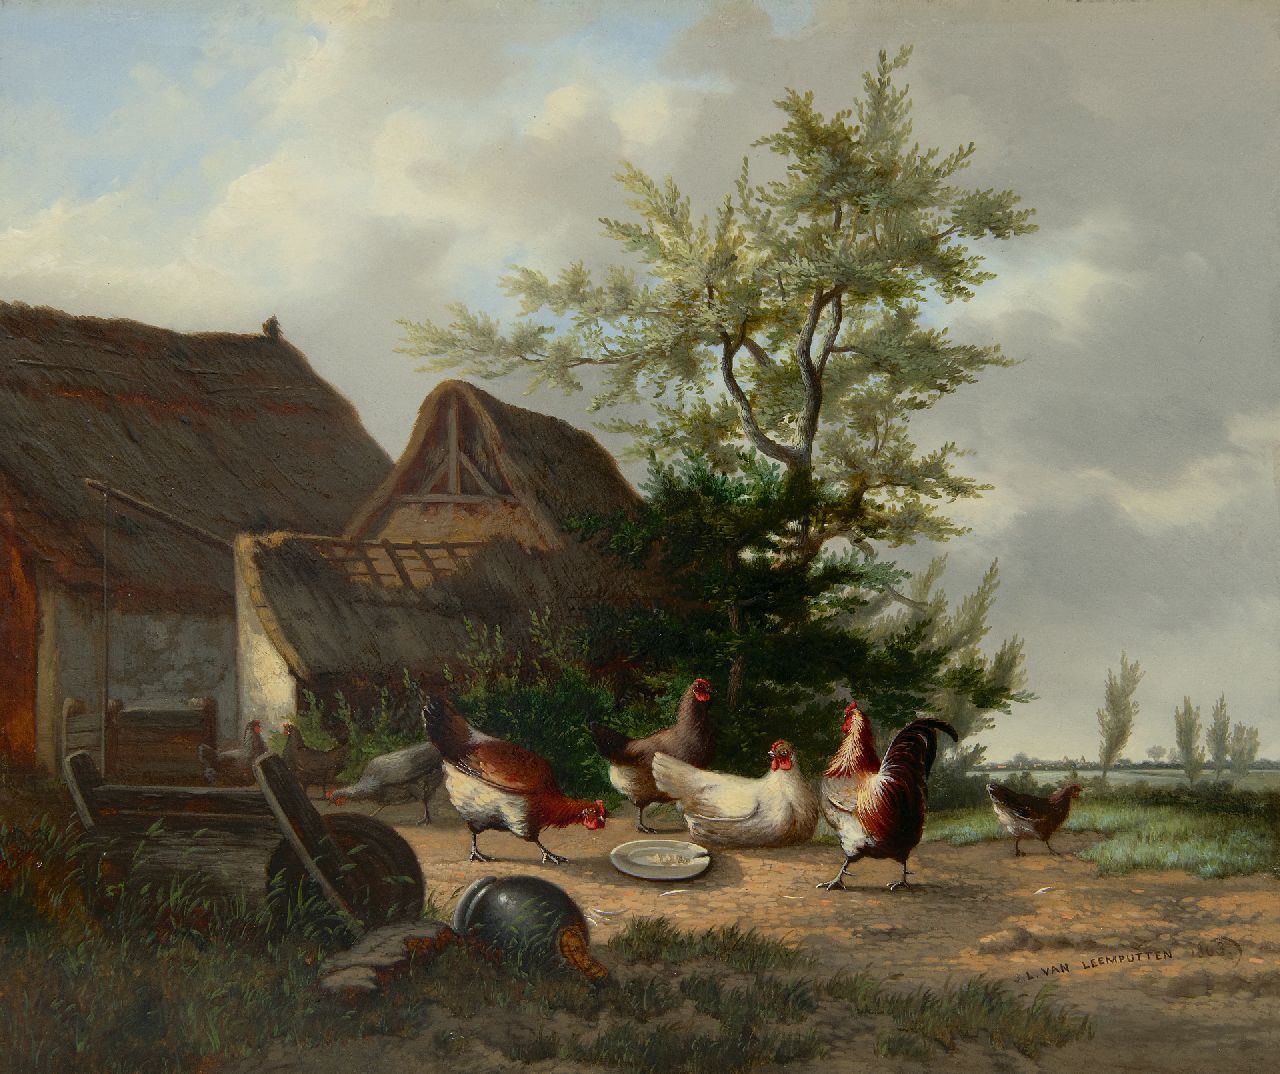 Leemputten J.L. van | Jean-Baptiste Leopold van Leemputten | Paintings offered for sale | Farmyard with rooster and chickens, oil on panel 28.1 x 33.7 cm, signed l.r. and dated 1863